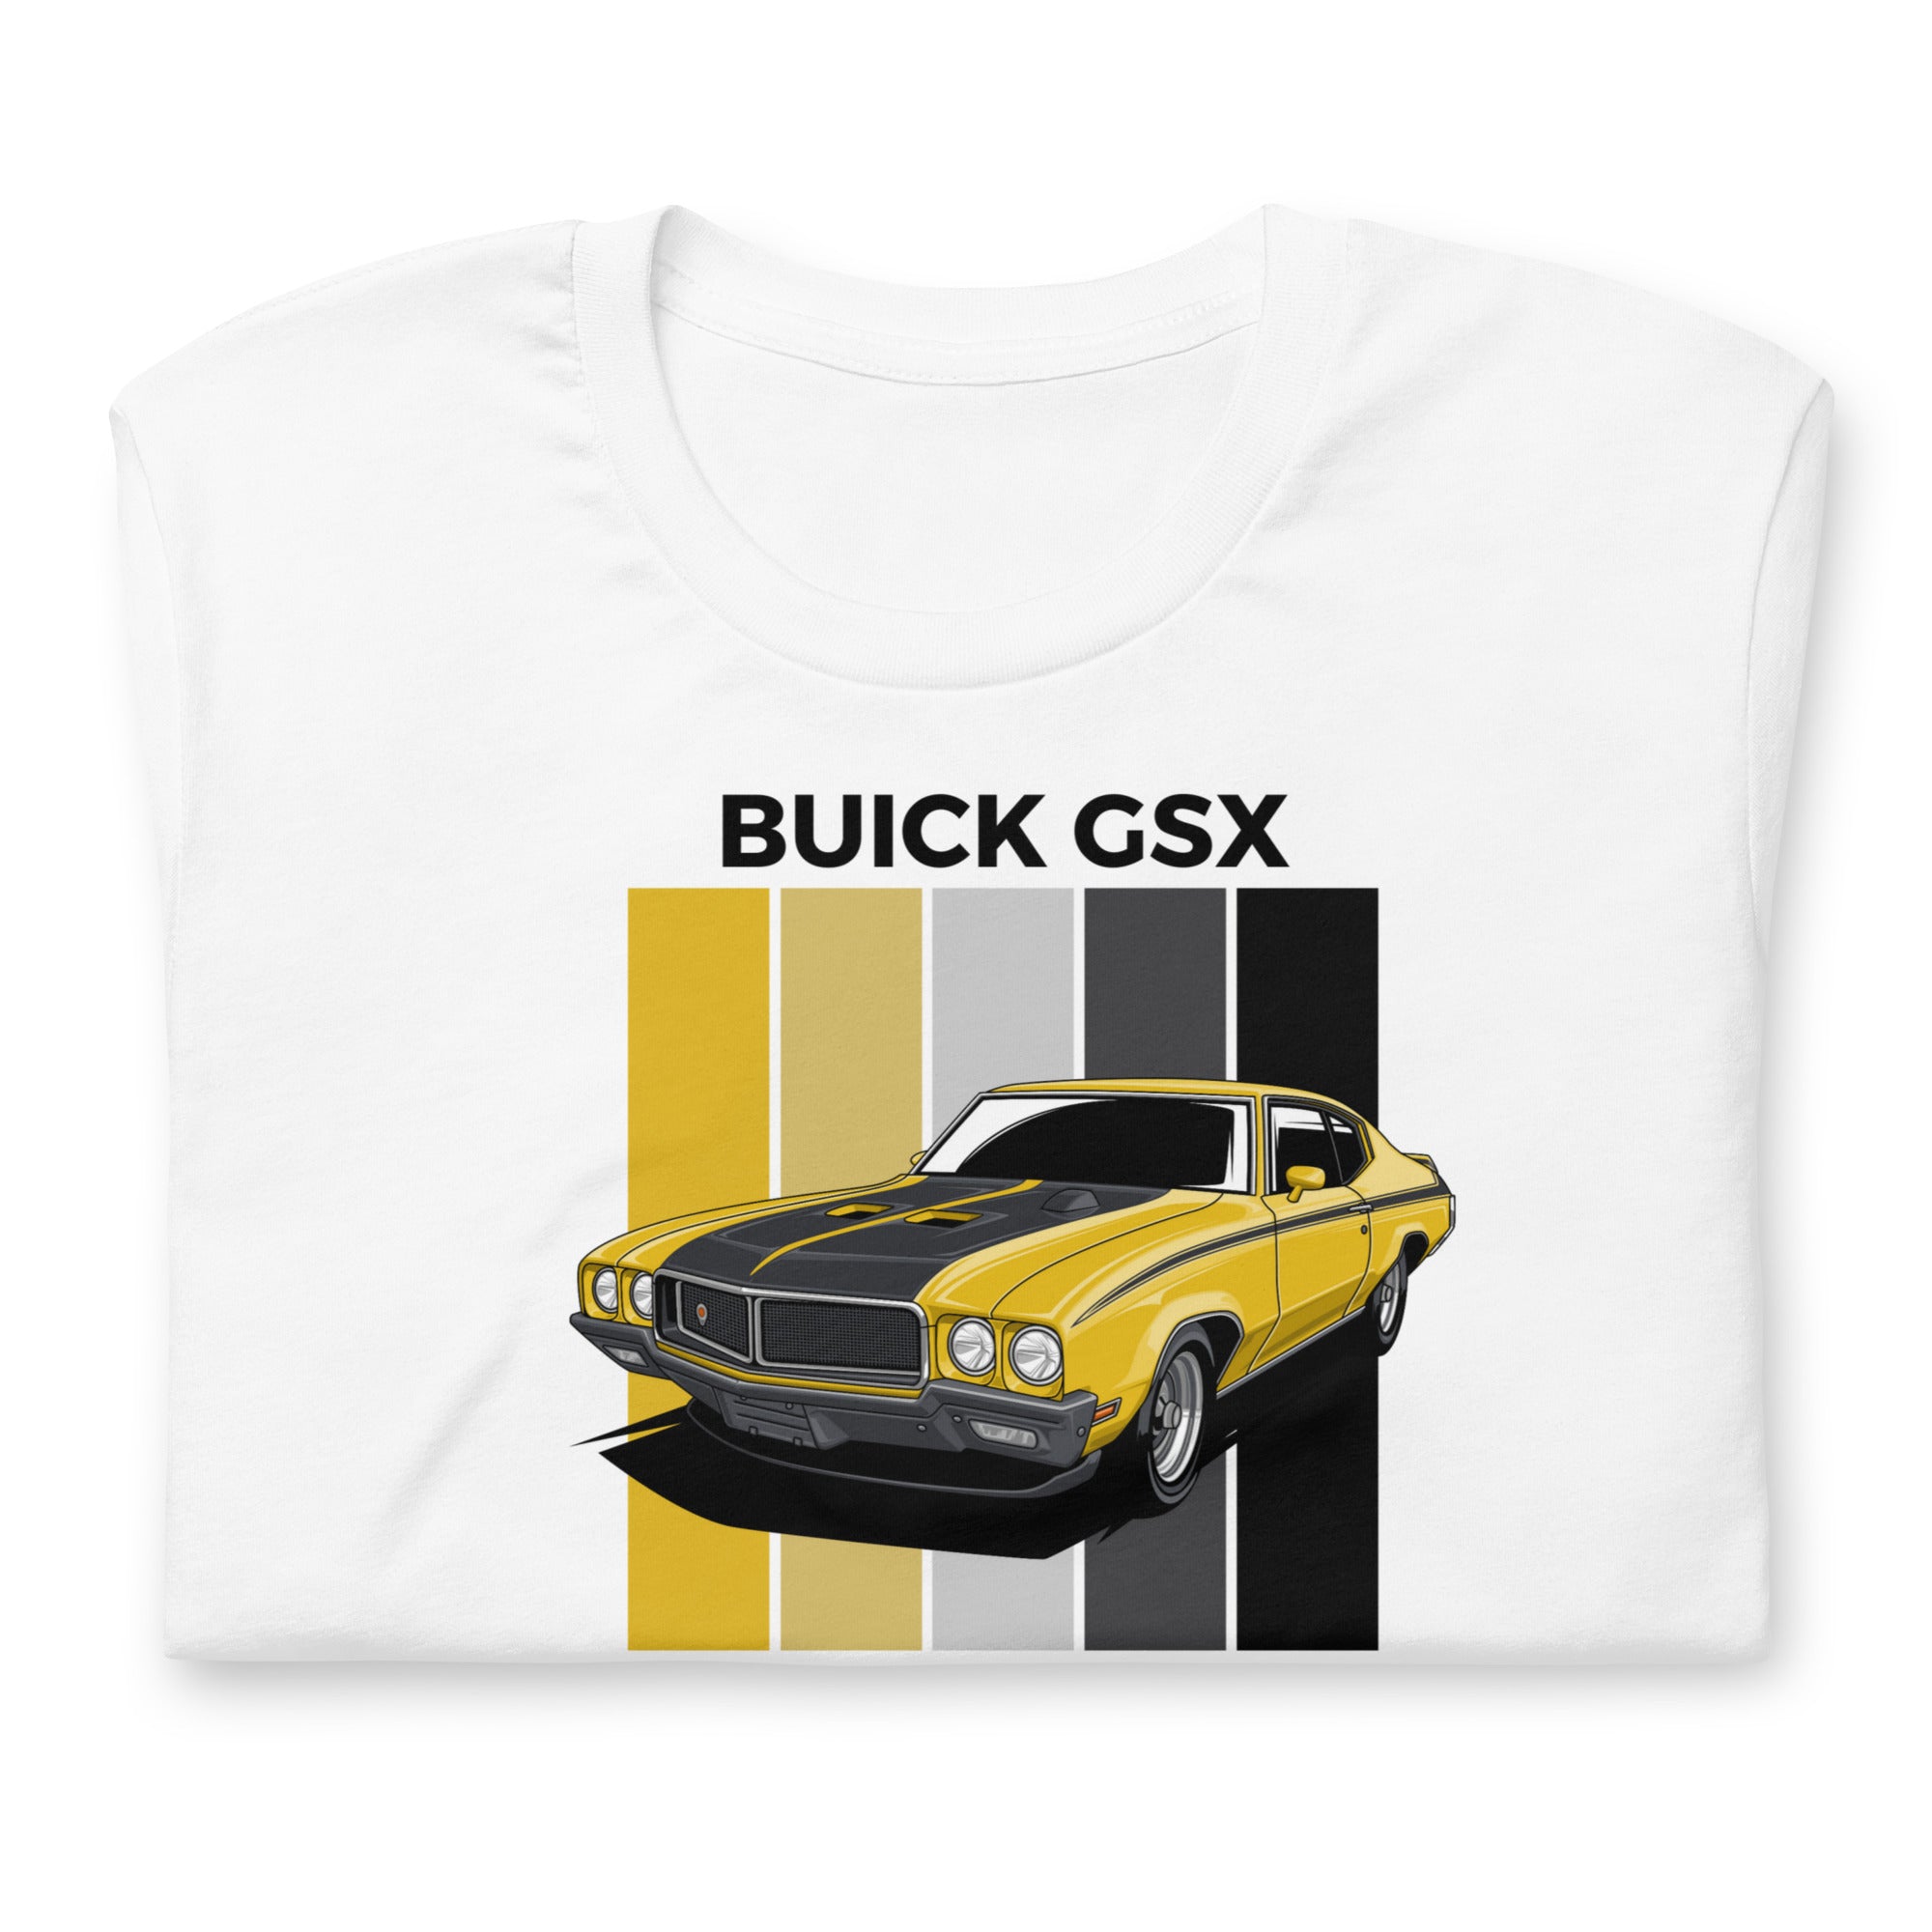 The Buick GSX